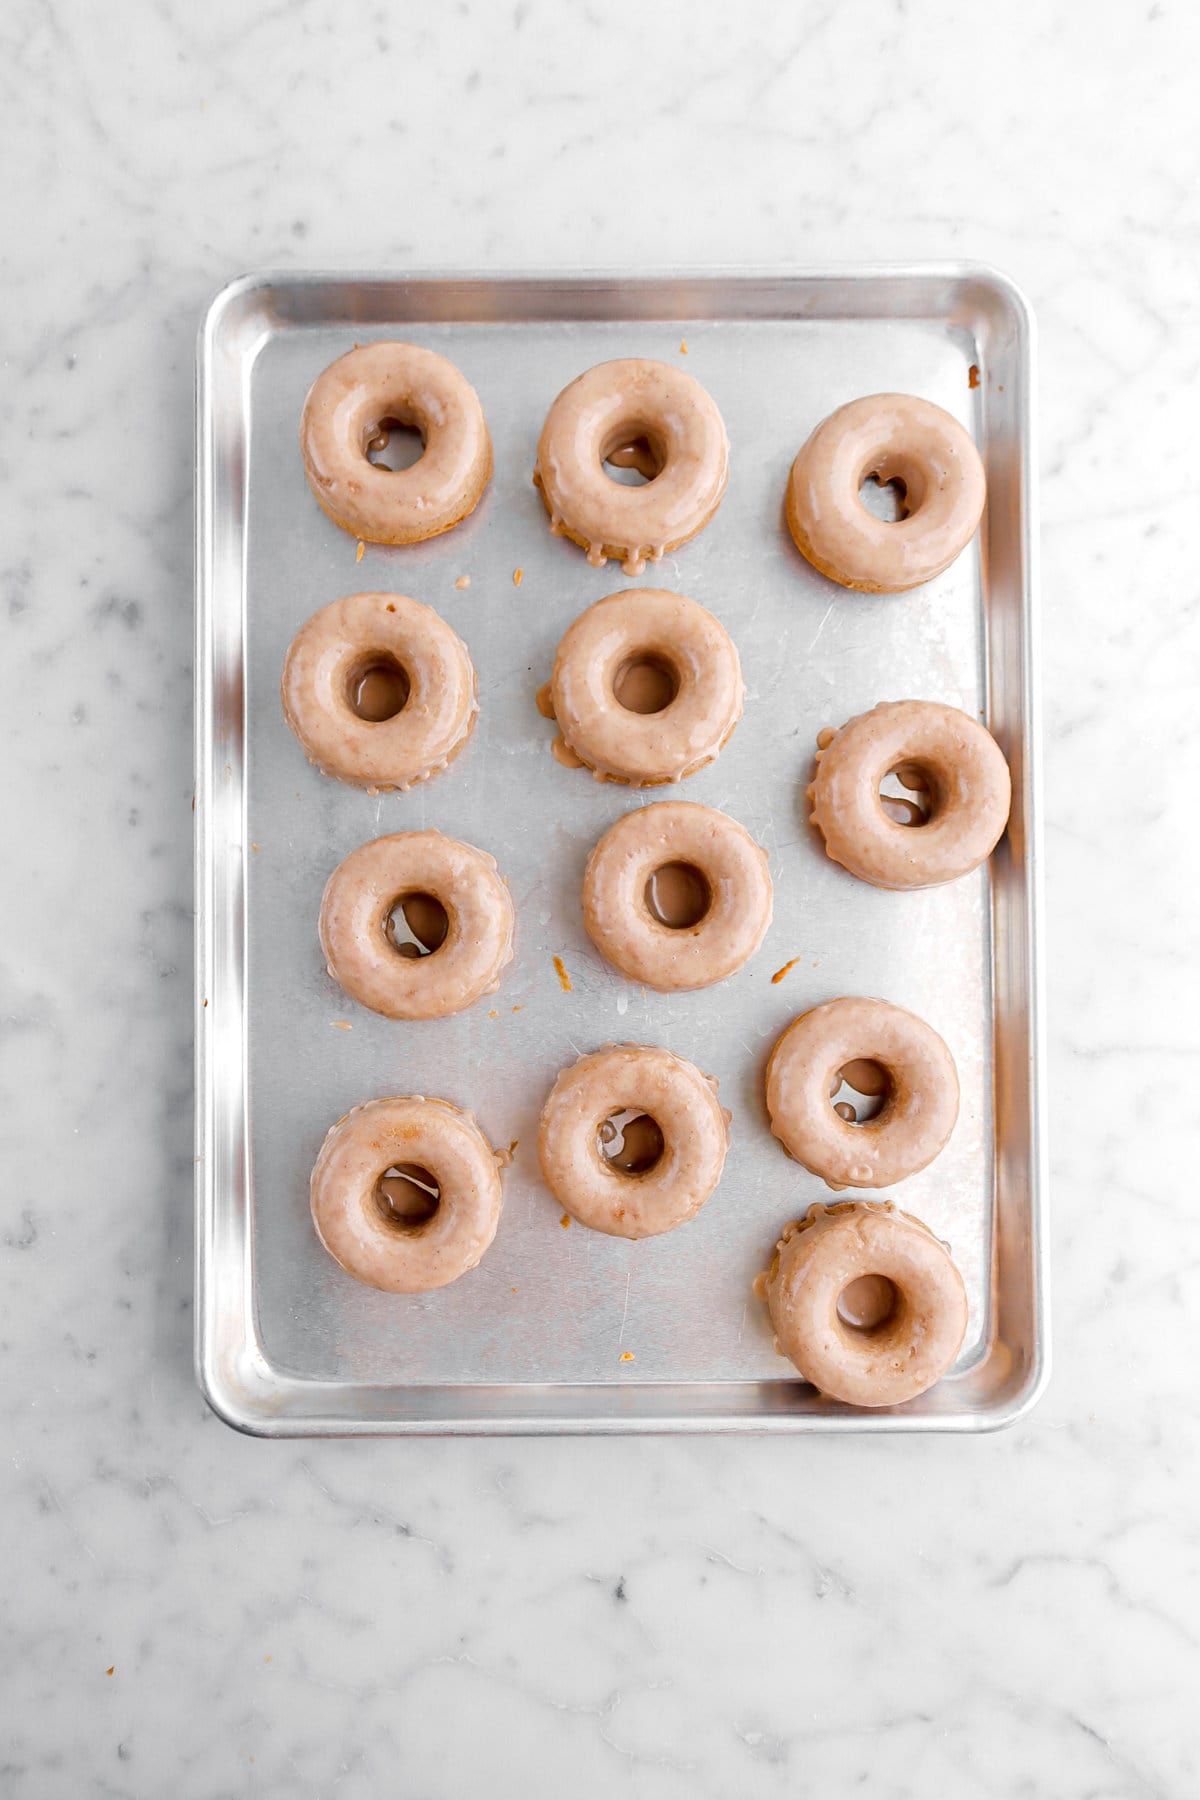 iced donuts on sheet pan.